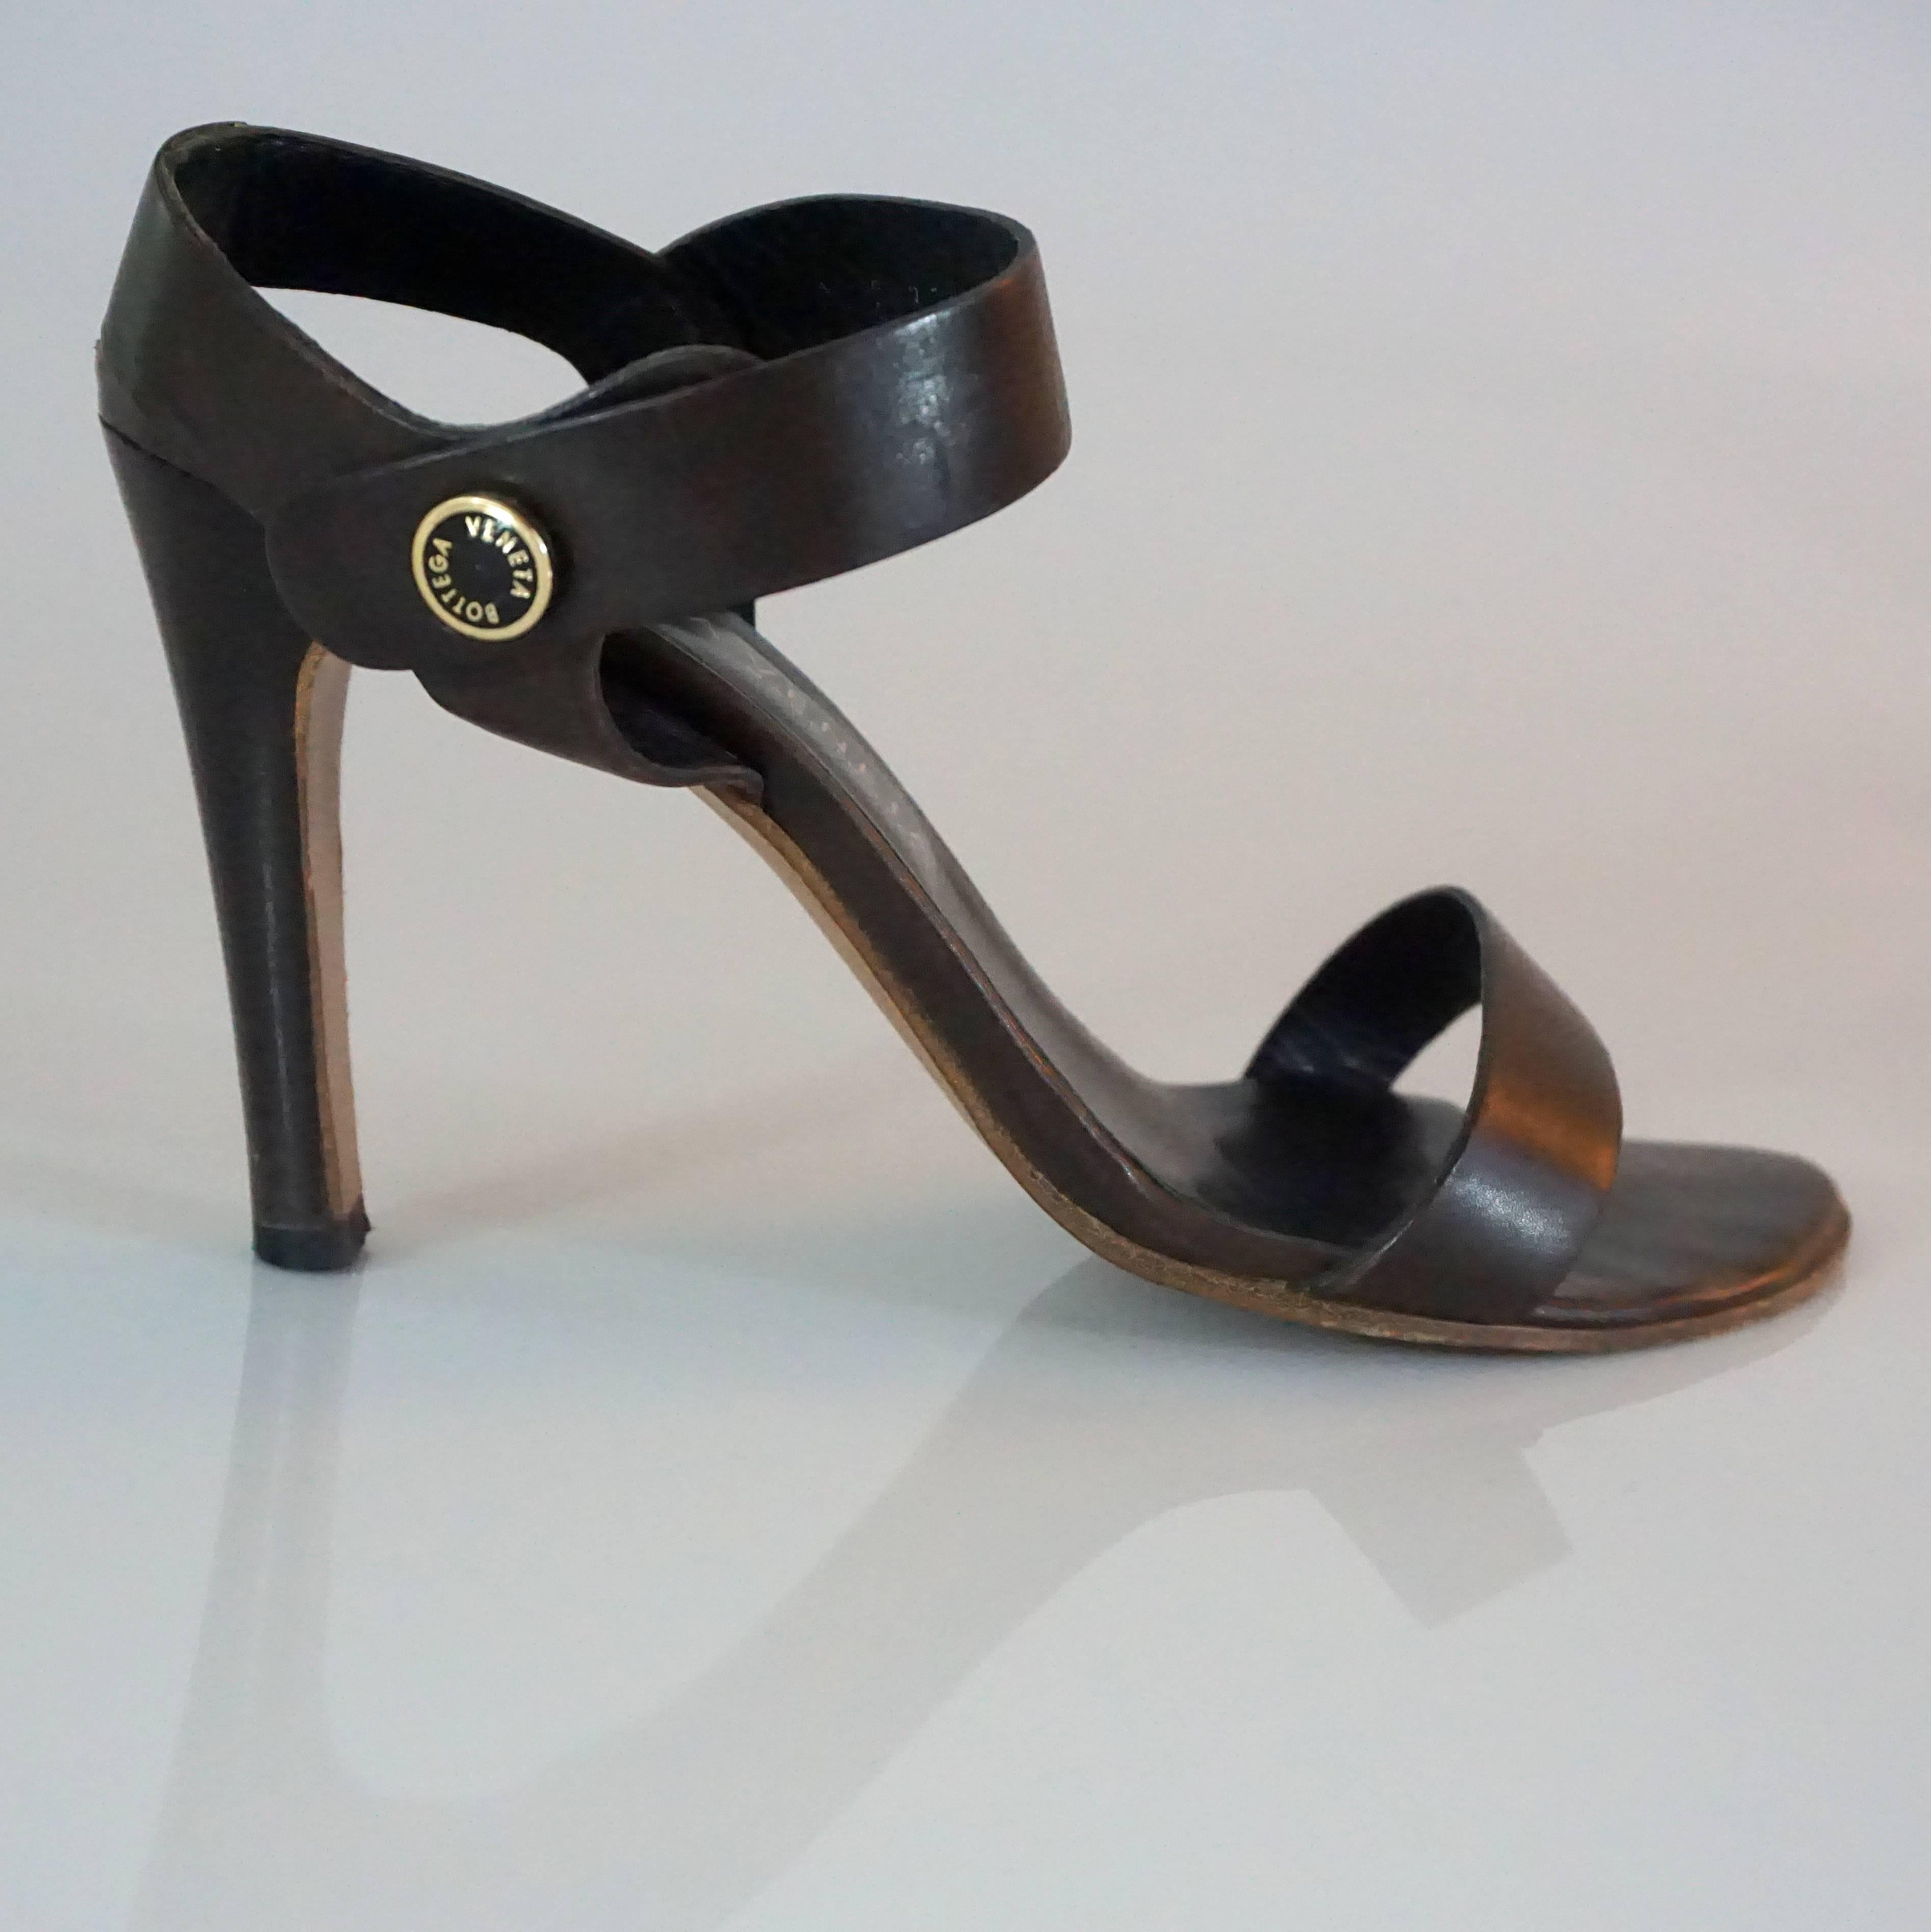 Bottega Veneta Chocolate Brown Leather Strappy Sandals - 36. These shoes have an ankle strap w/ a black and gold Bottega Snap. These shoes are in good condition with a faint smudge and some marks on the leather. 

Heel Height 4